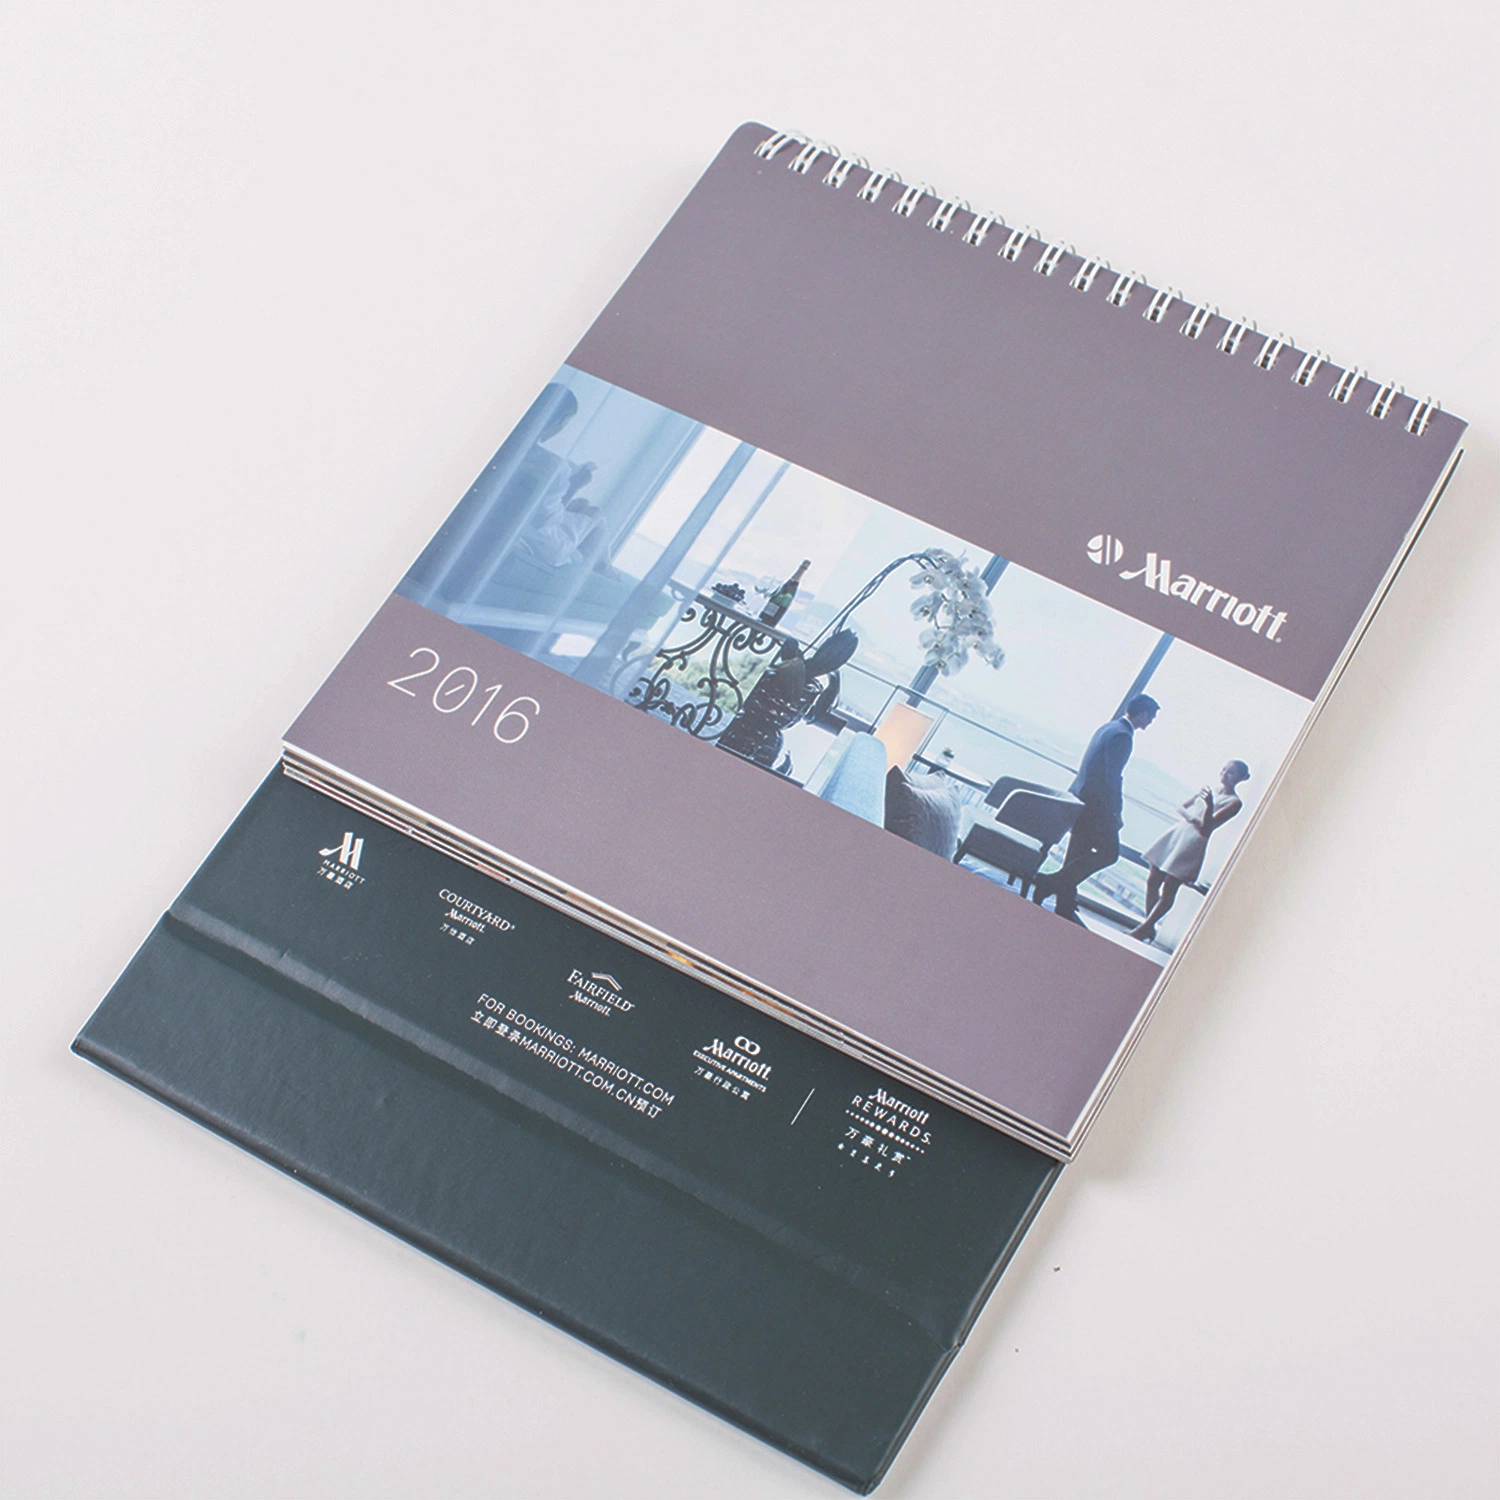 China Wholesale Company Customized Printing Service for Desk Calendar